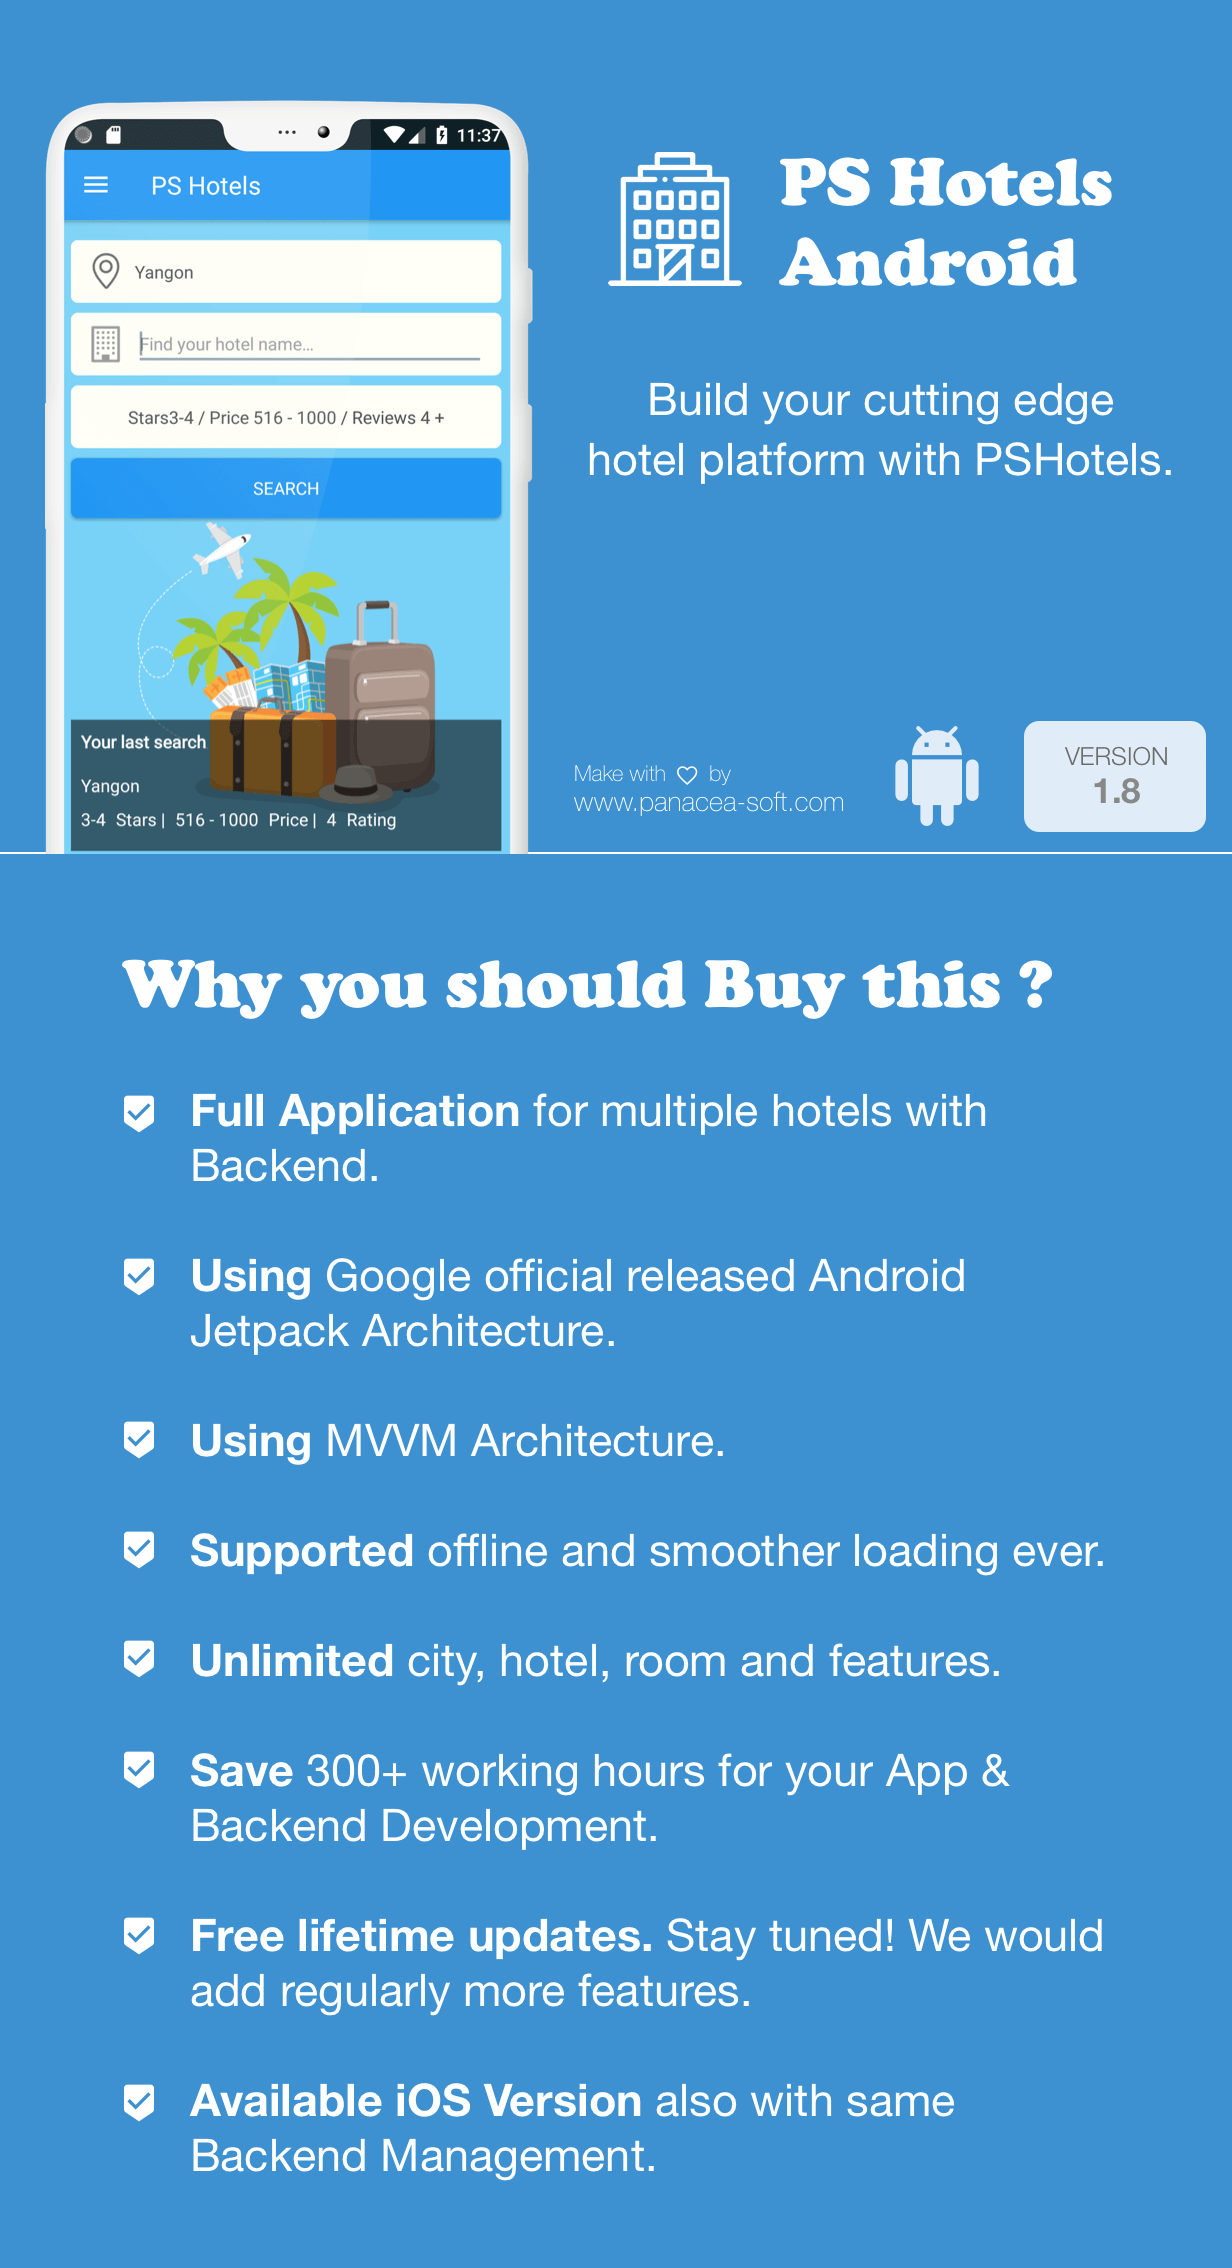 Hotels Android App With Material Design & PHP Backend (V1.8) - 2